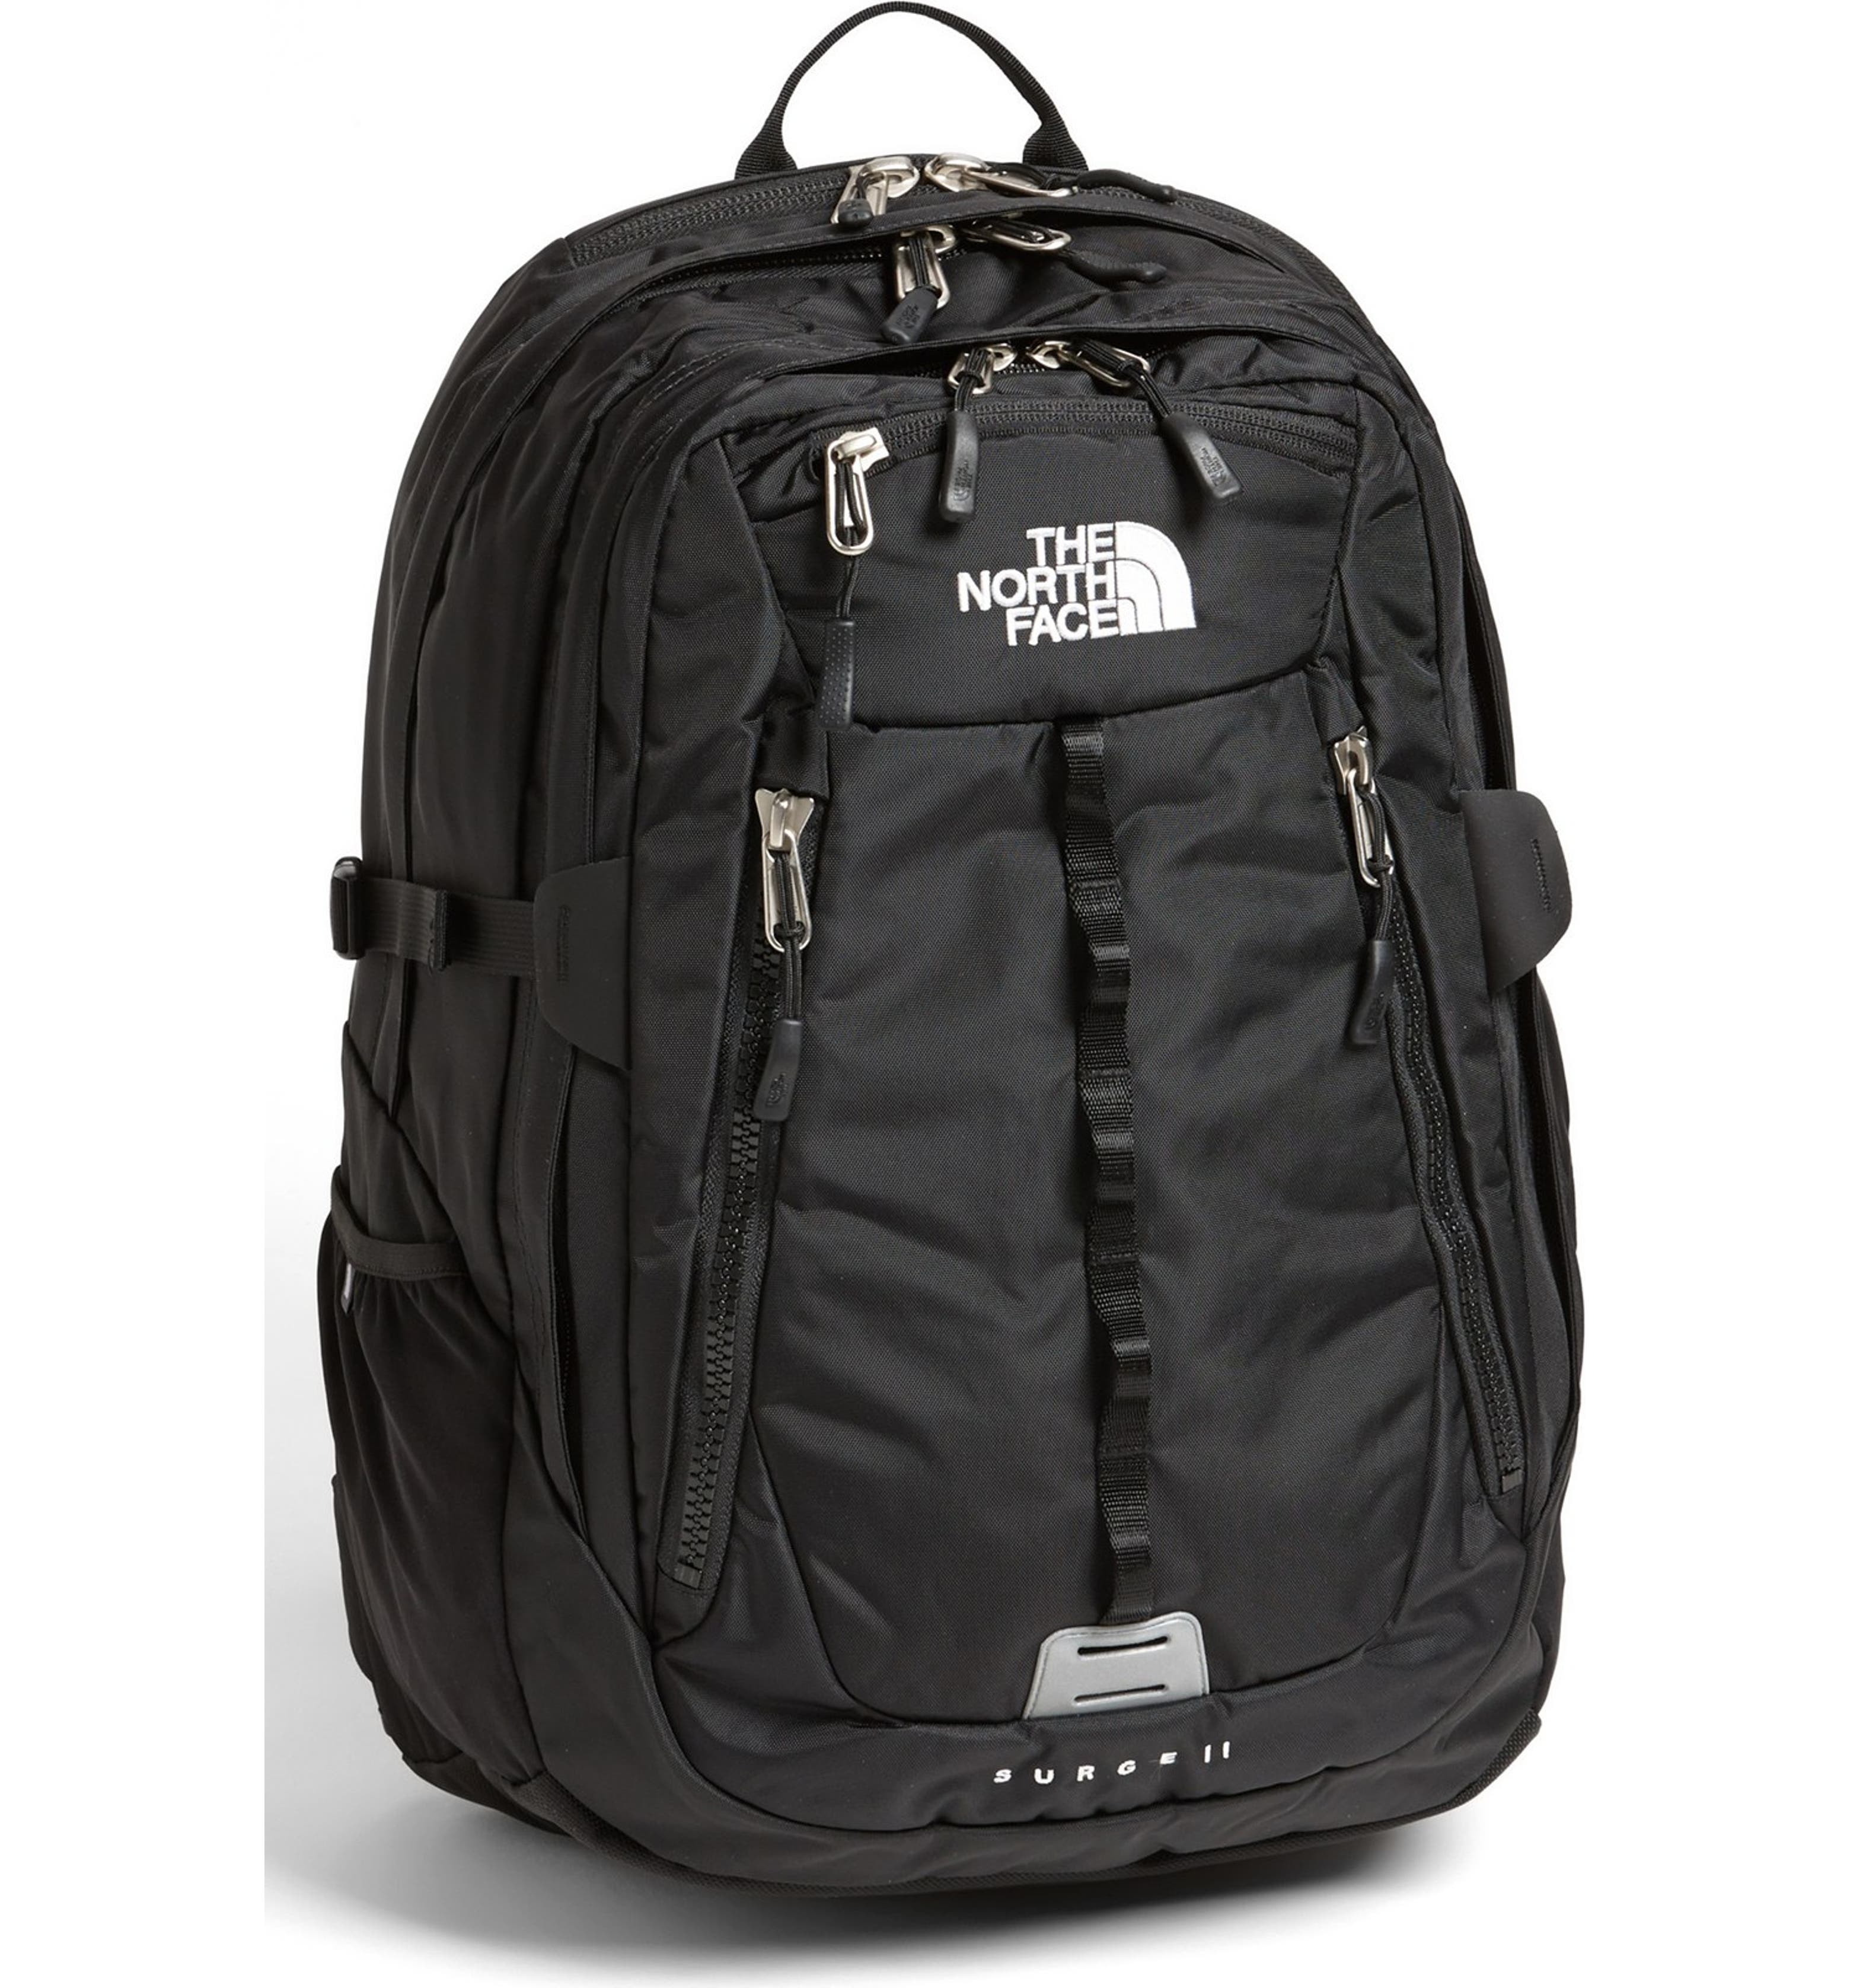 The North Face 'Surge II' Backpack Nordstrom